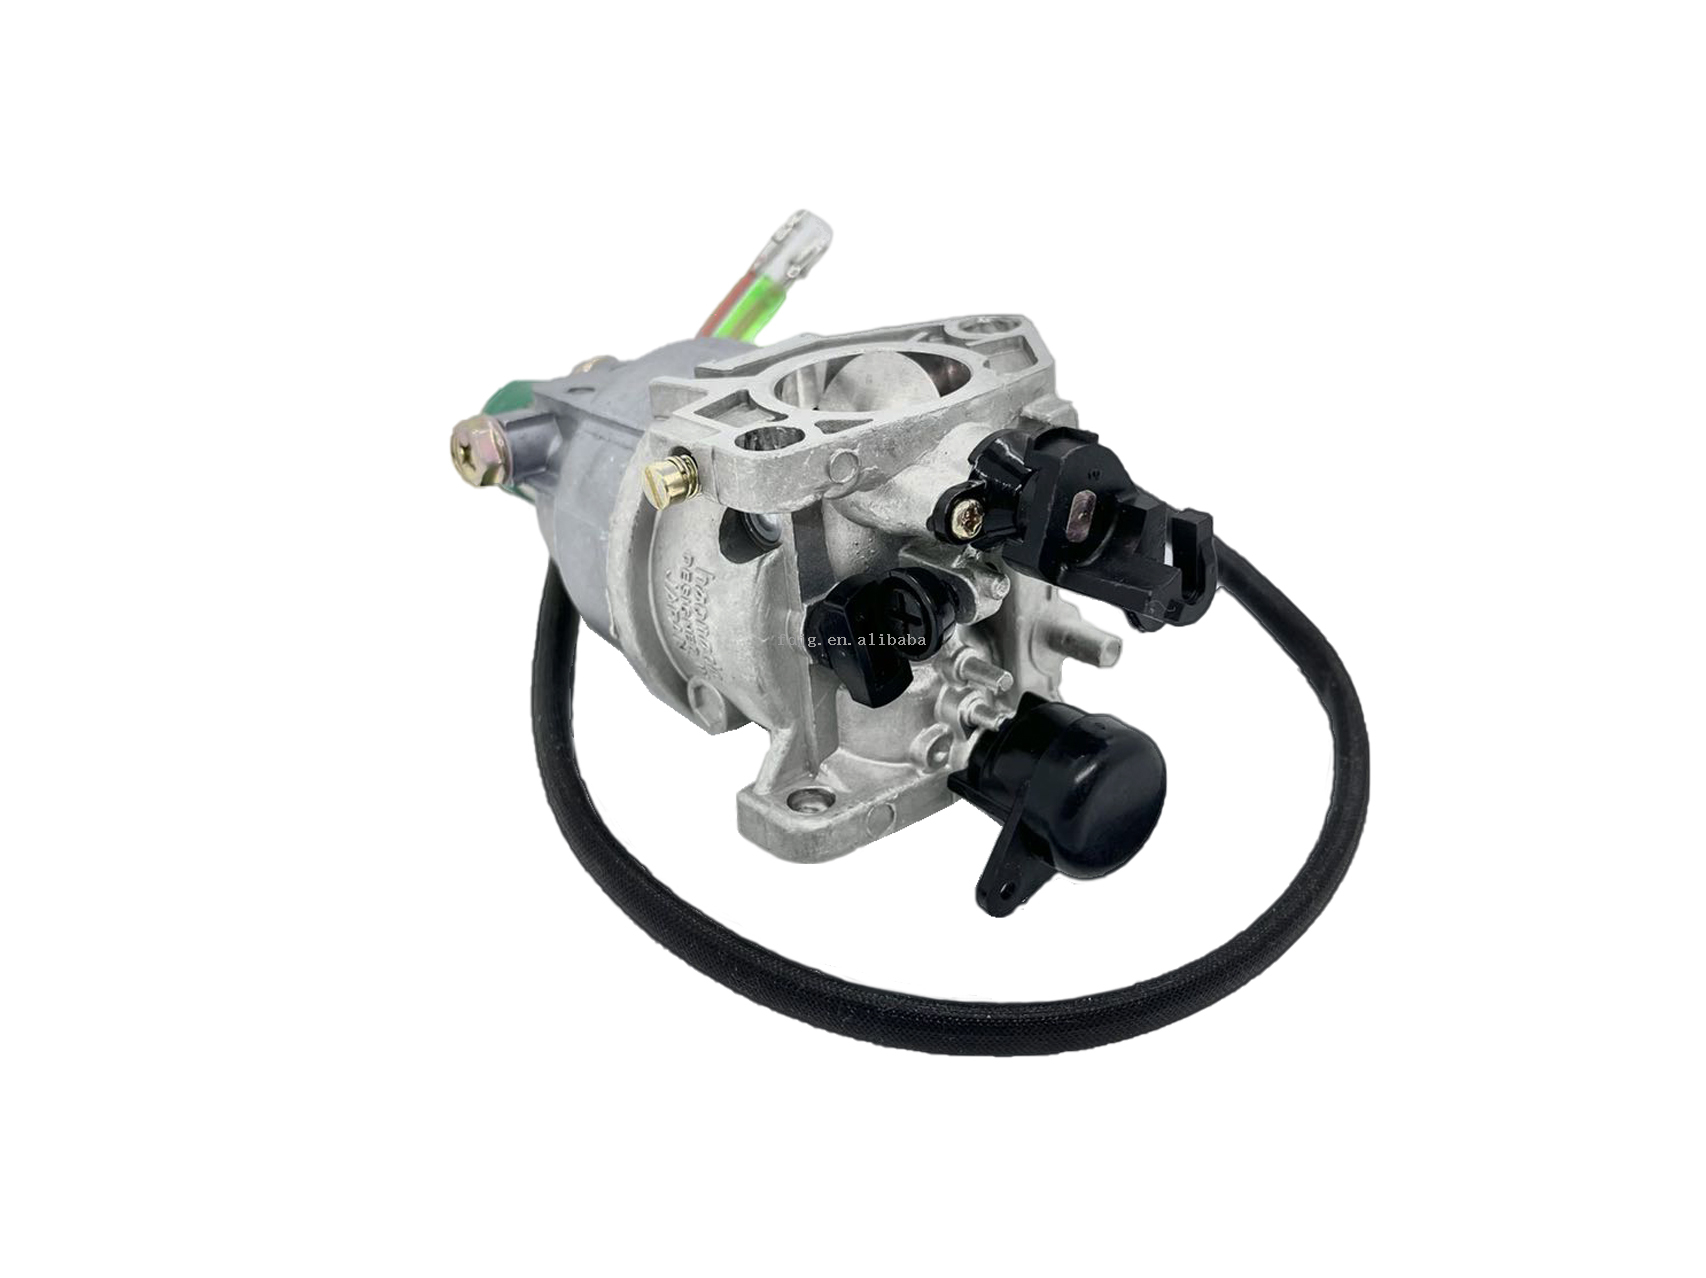 GX390 Carb with Solenoid Stable Automatic Petrol Generator Carburetor